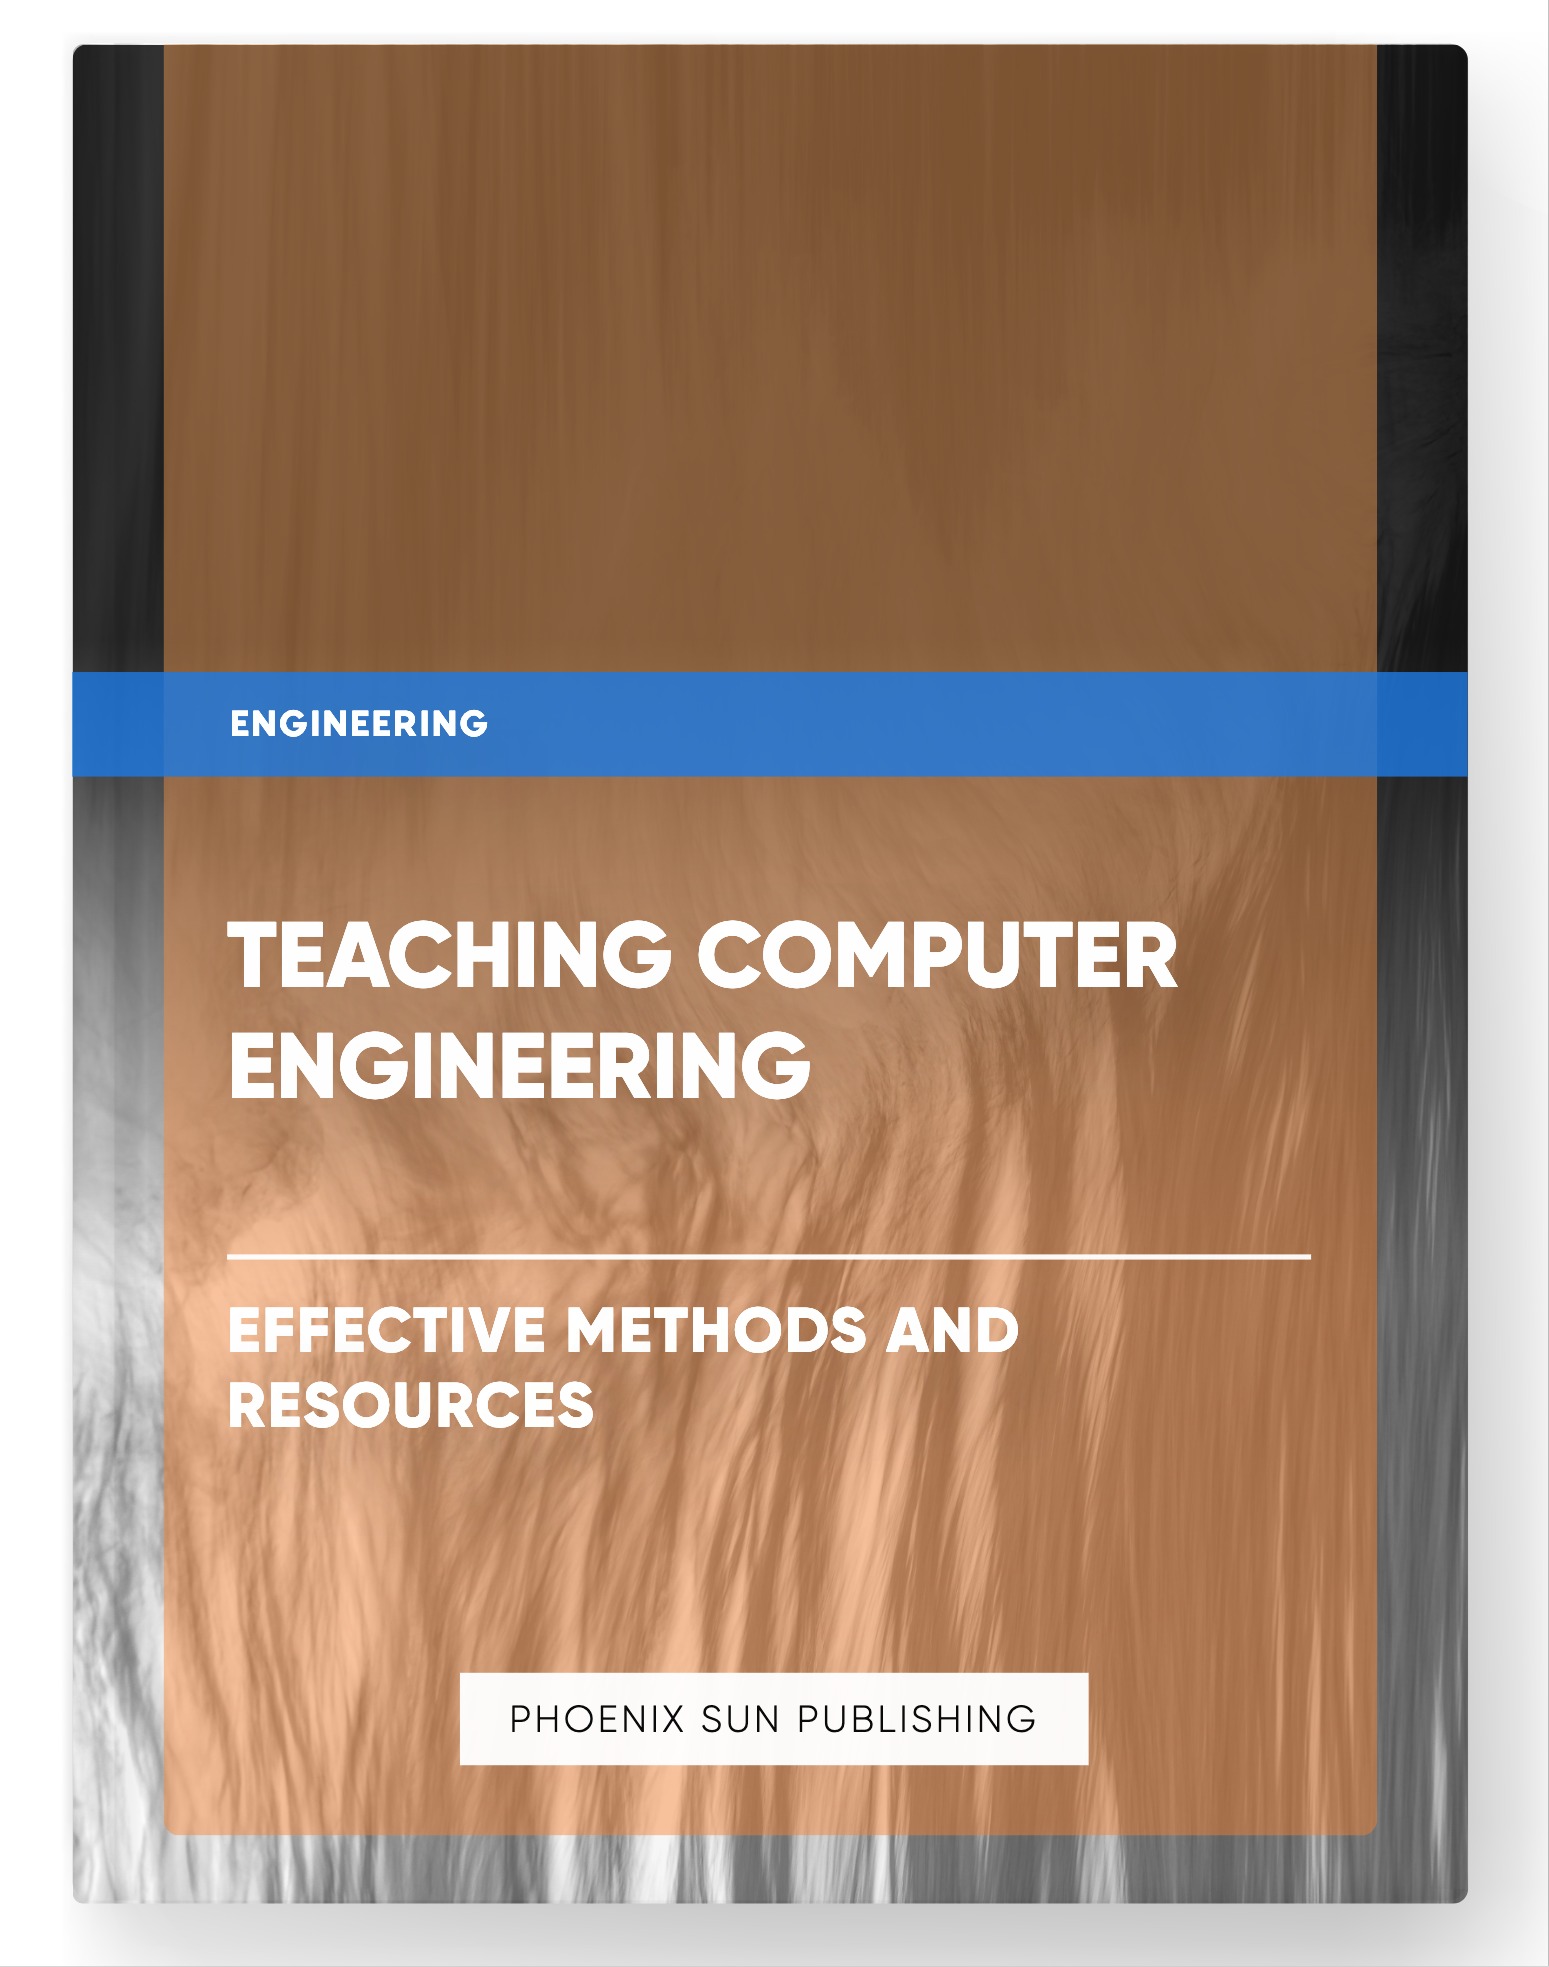 Teaching Computer Engineering – Effective Methods and Resources